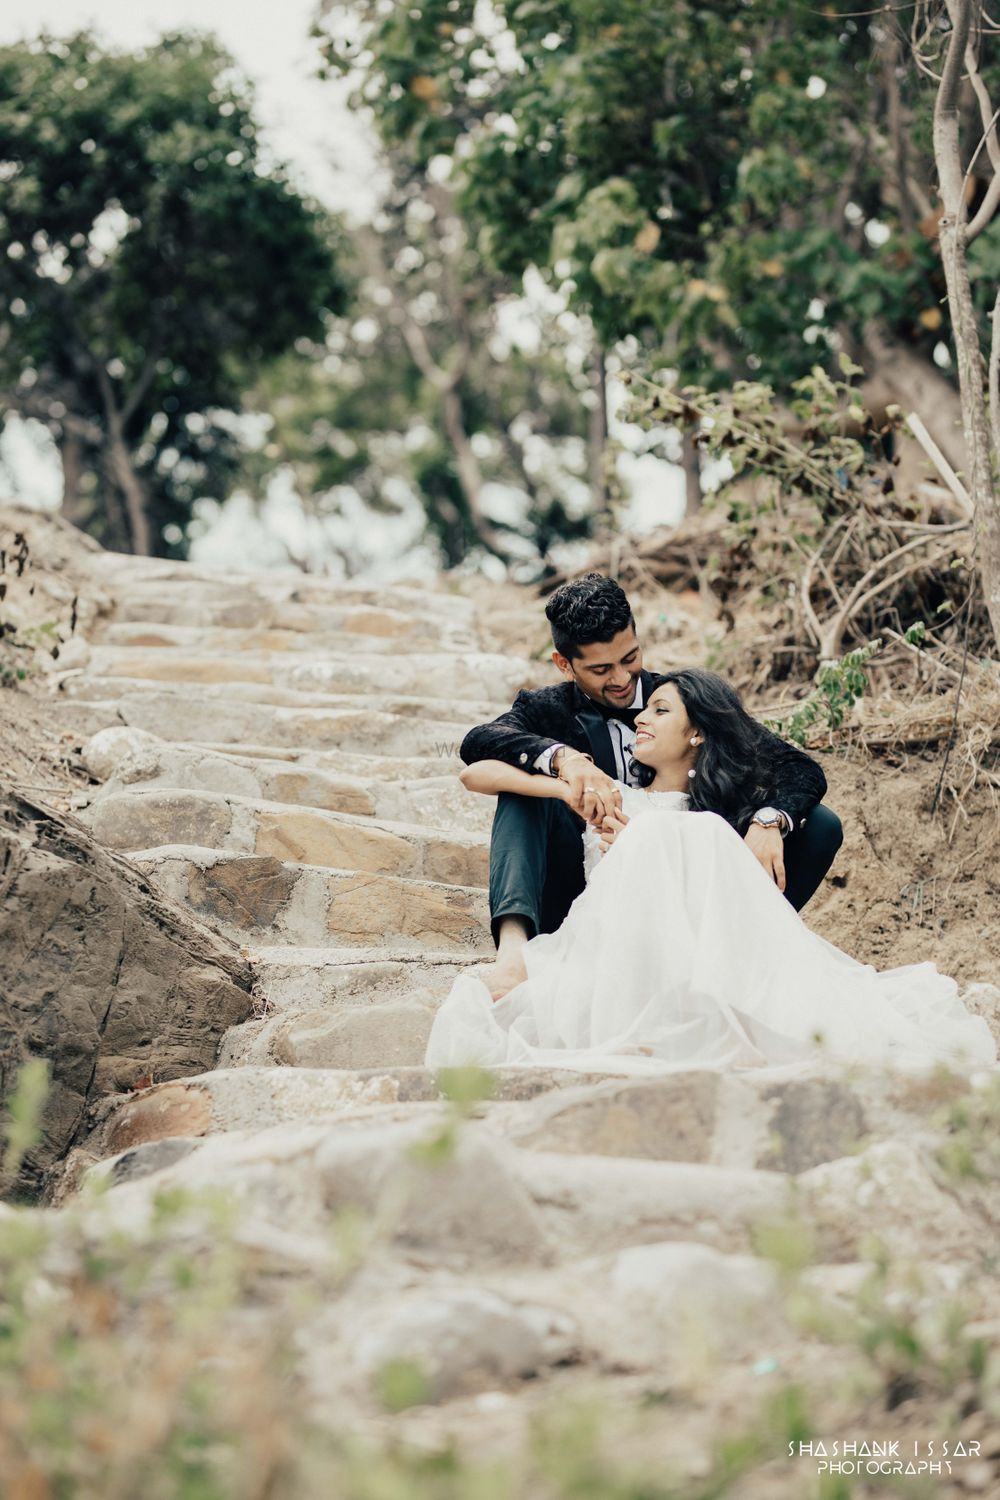 Photo From Nidhi and Tejas - By Shashank Issar Photography